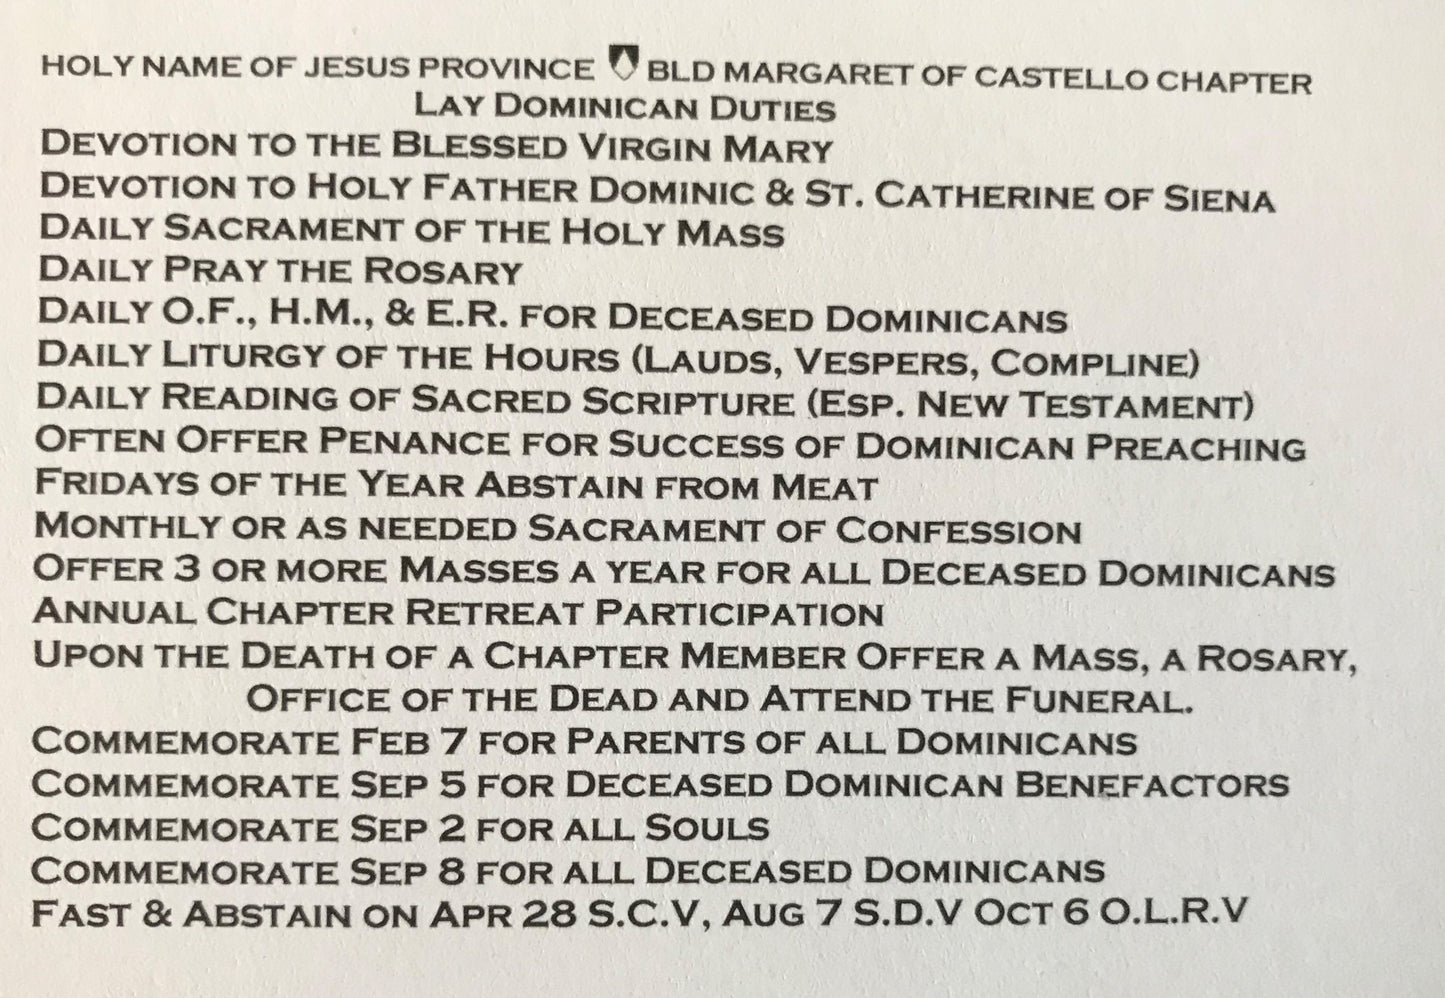 Duties for Lay Dominicans